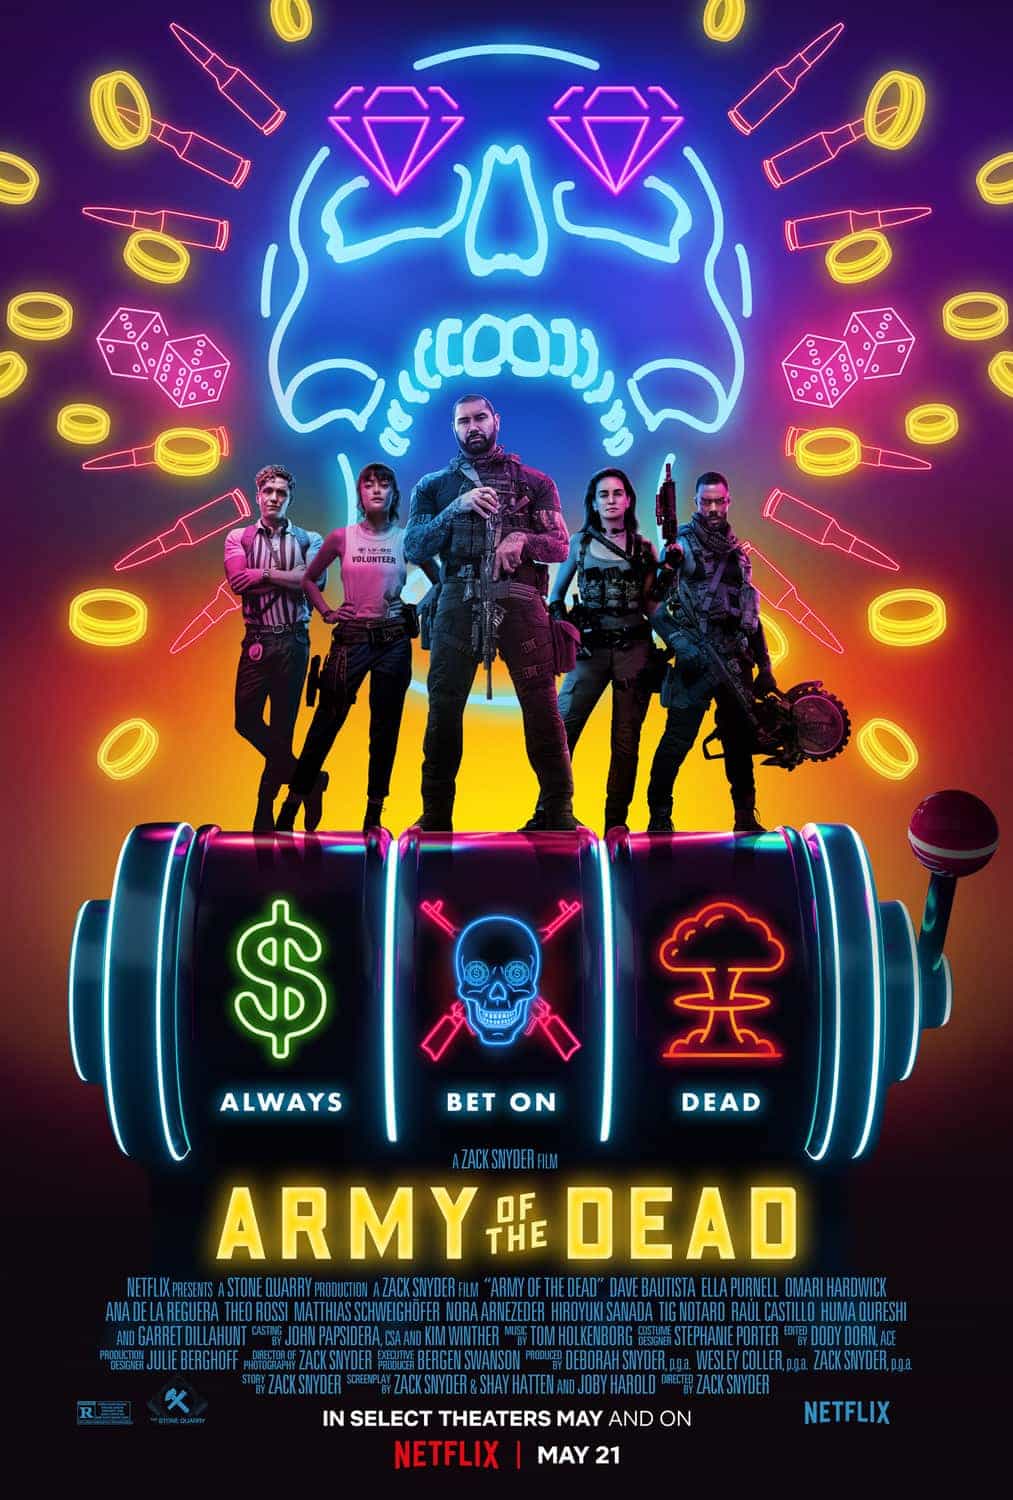 New trailer for Army Of The Dead - directed by Zack Snyder and released on Netflix May 21st